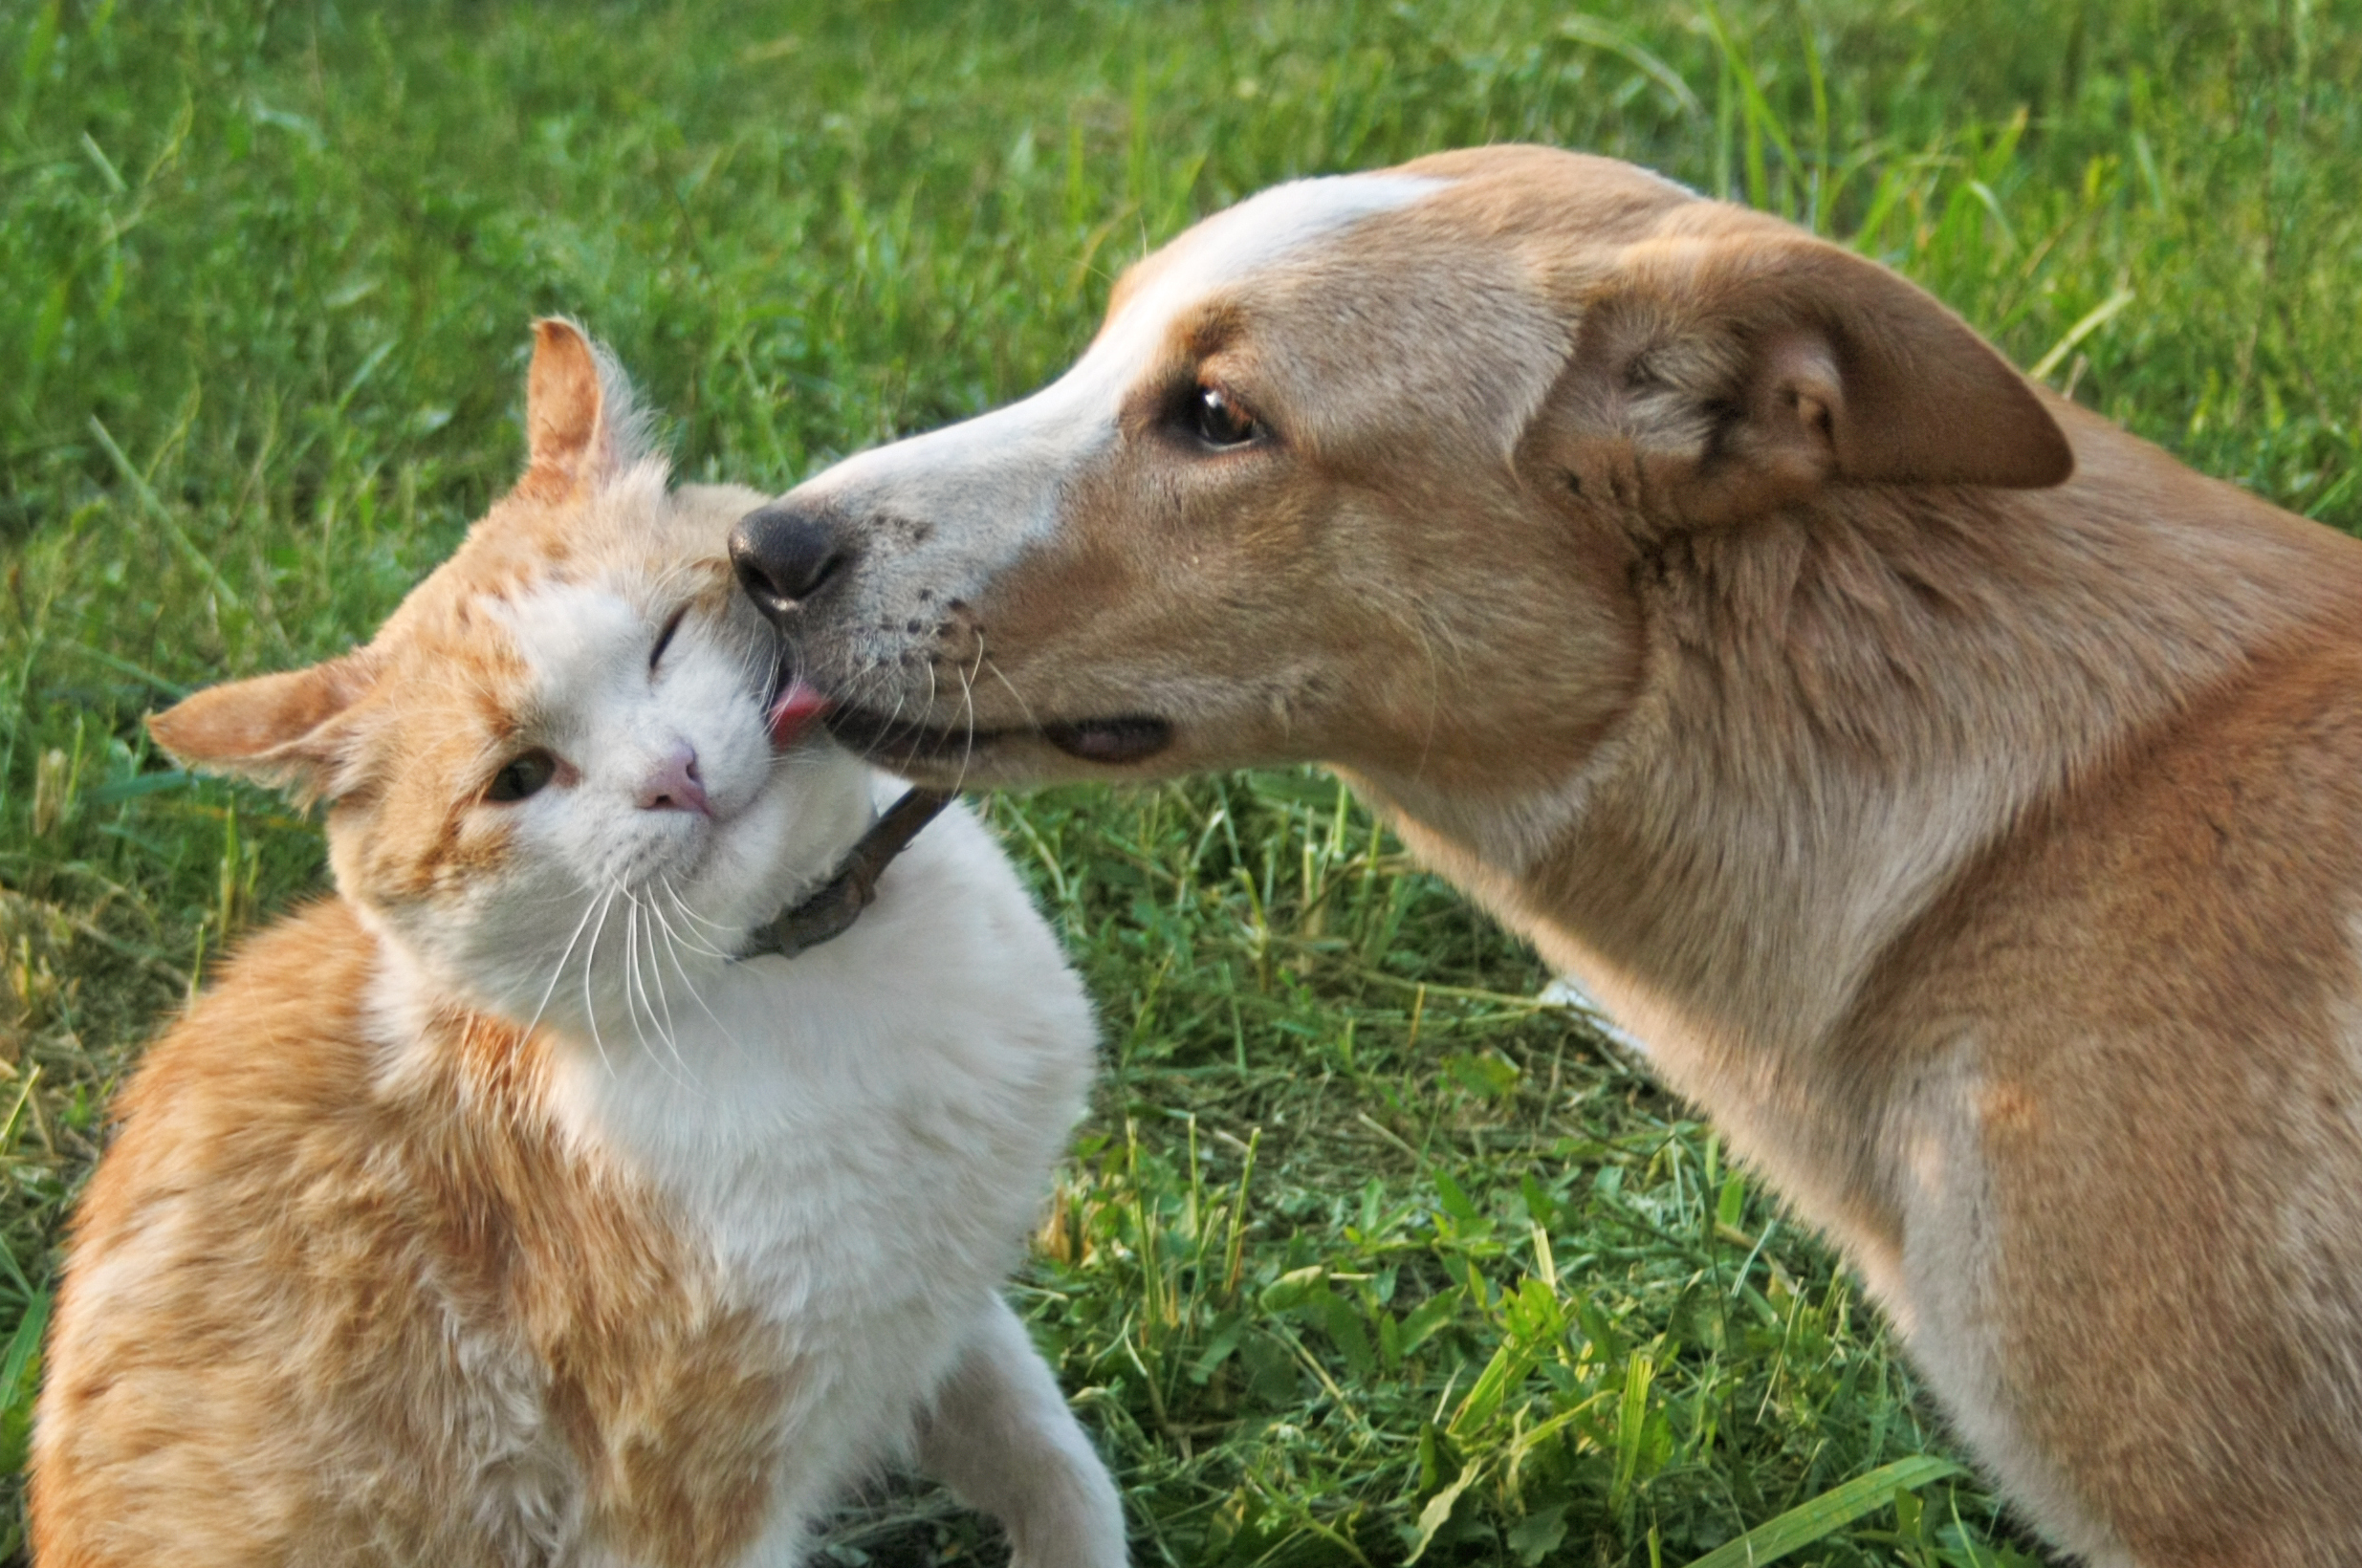 Dog licking a cat’s face outside